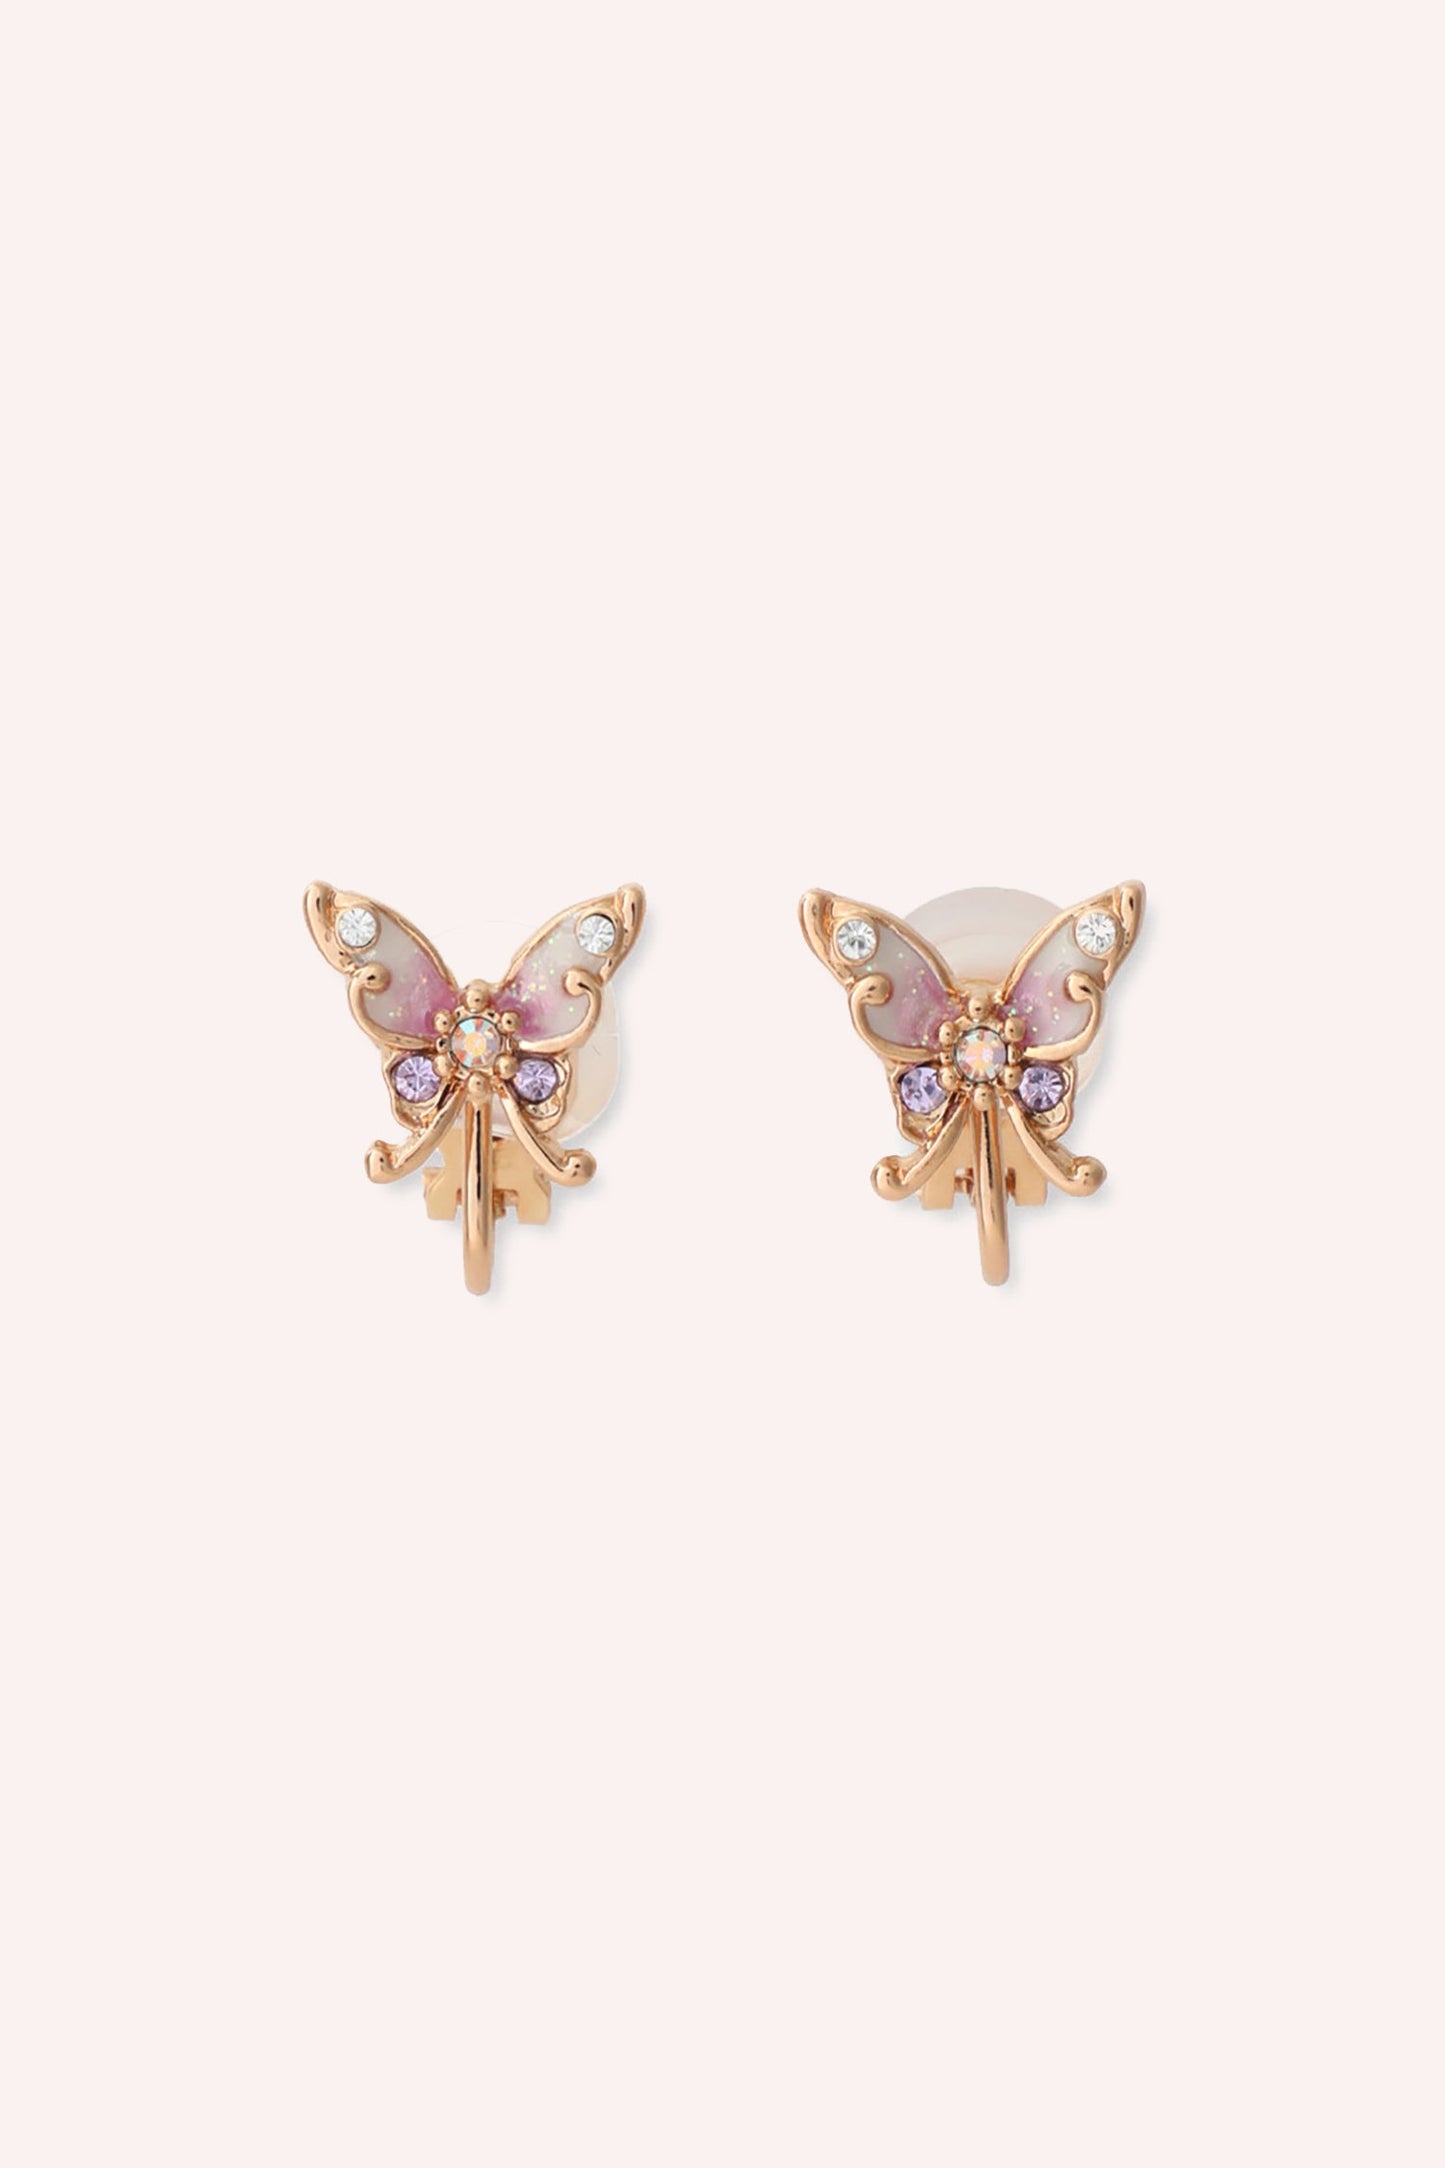 Butterfly Stud Earrings rose gold, Purple Butterfly Embellished with Gems, Whimsical Gold Detailing